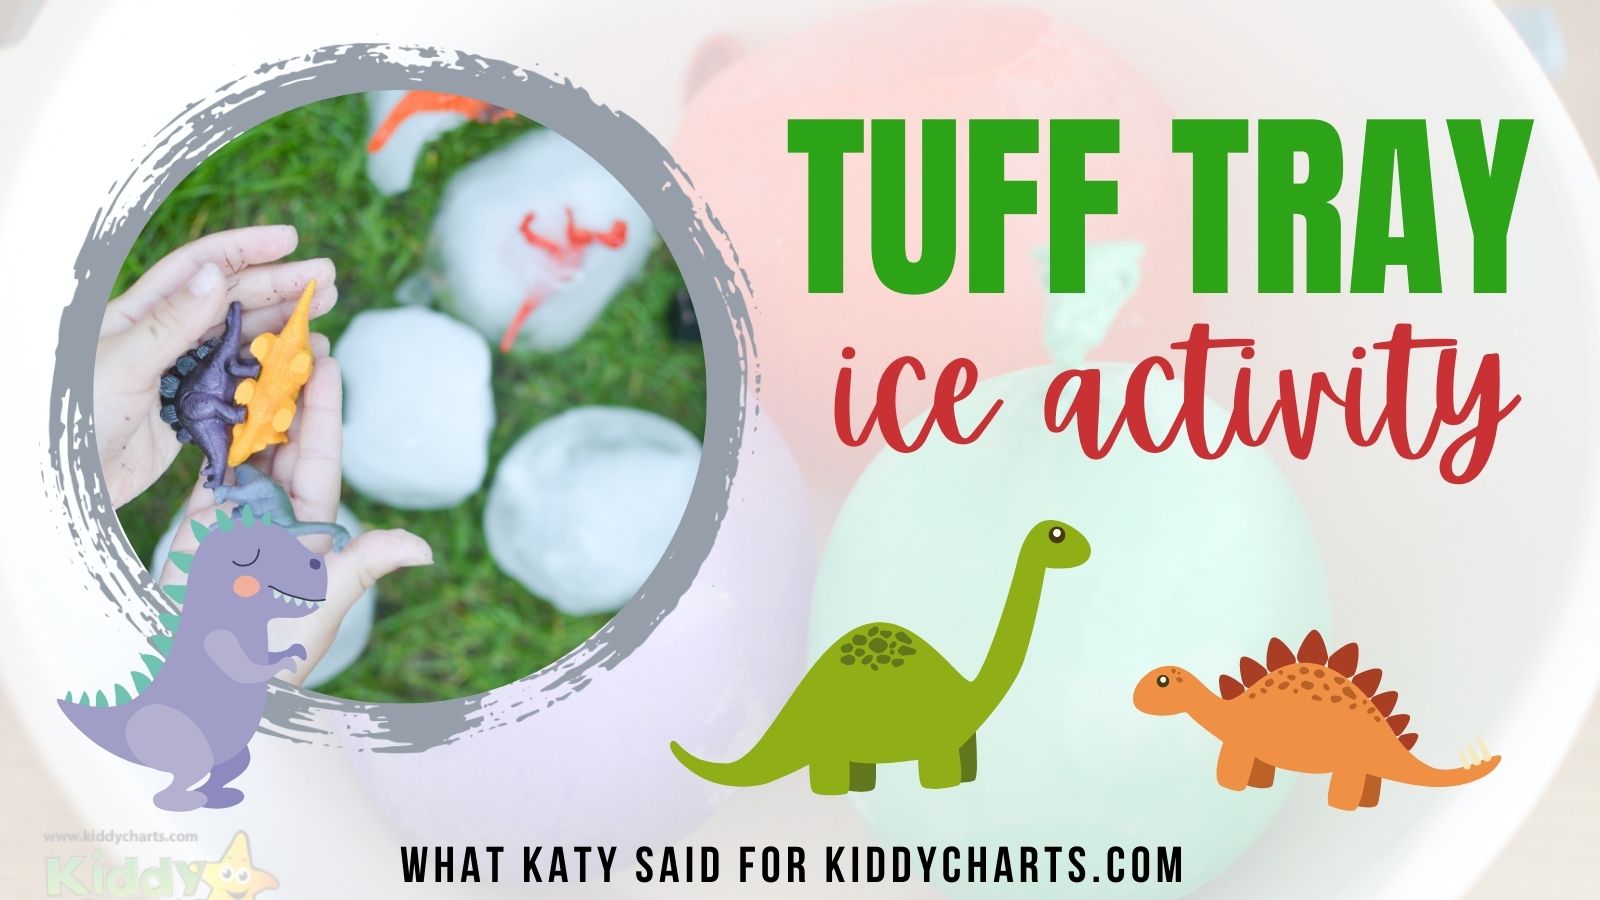 Learning and Exploring Through Play: St Patricks Day Tuff Tray